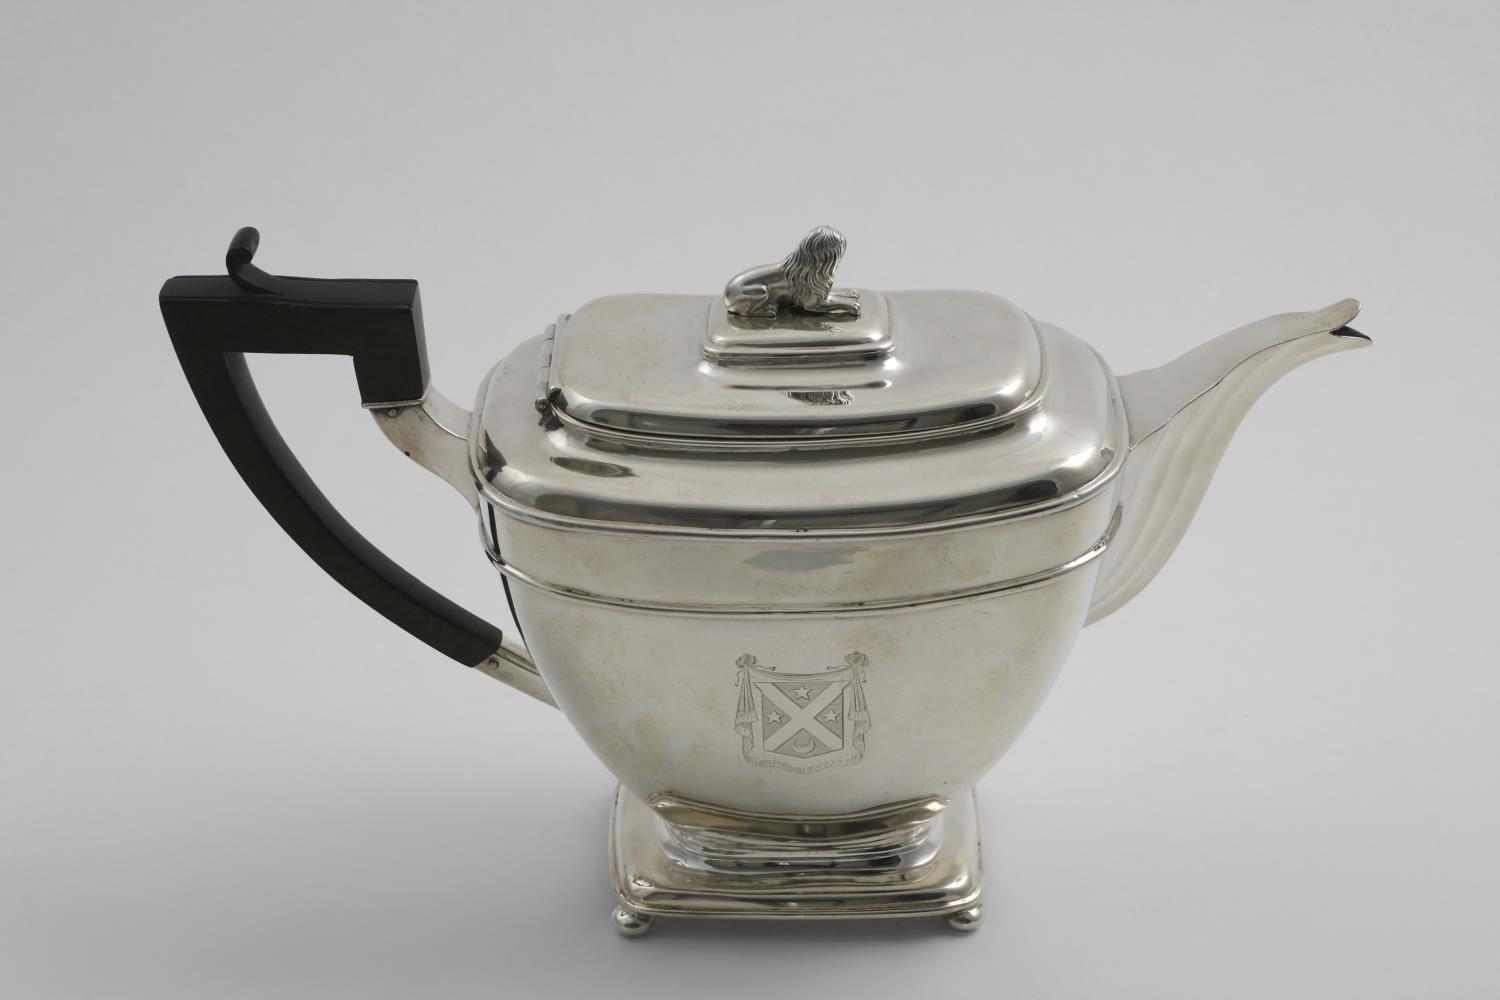 A VICTORIAN SCOTTISH PROVINCIAL TEA POT of rounded rectangular form on button feet, with a fluted